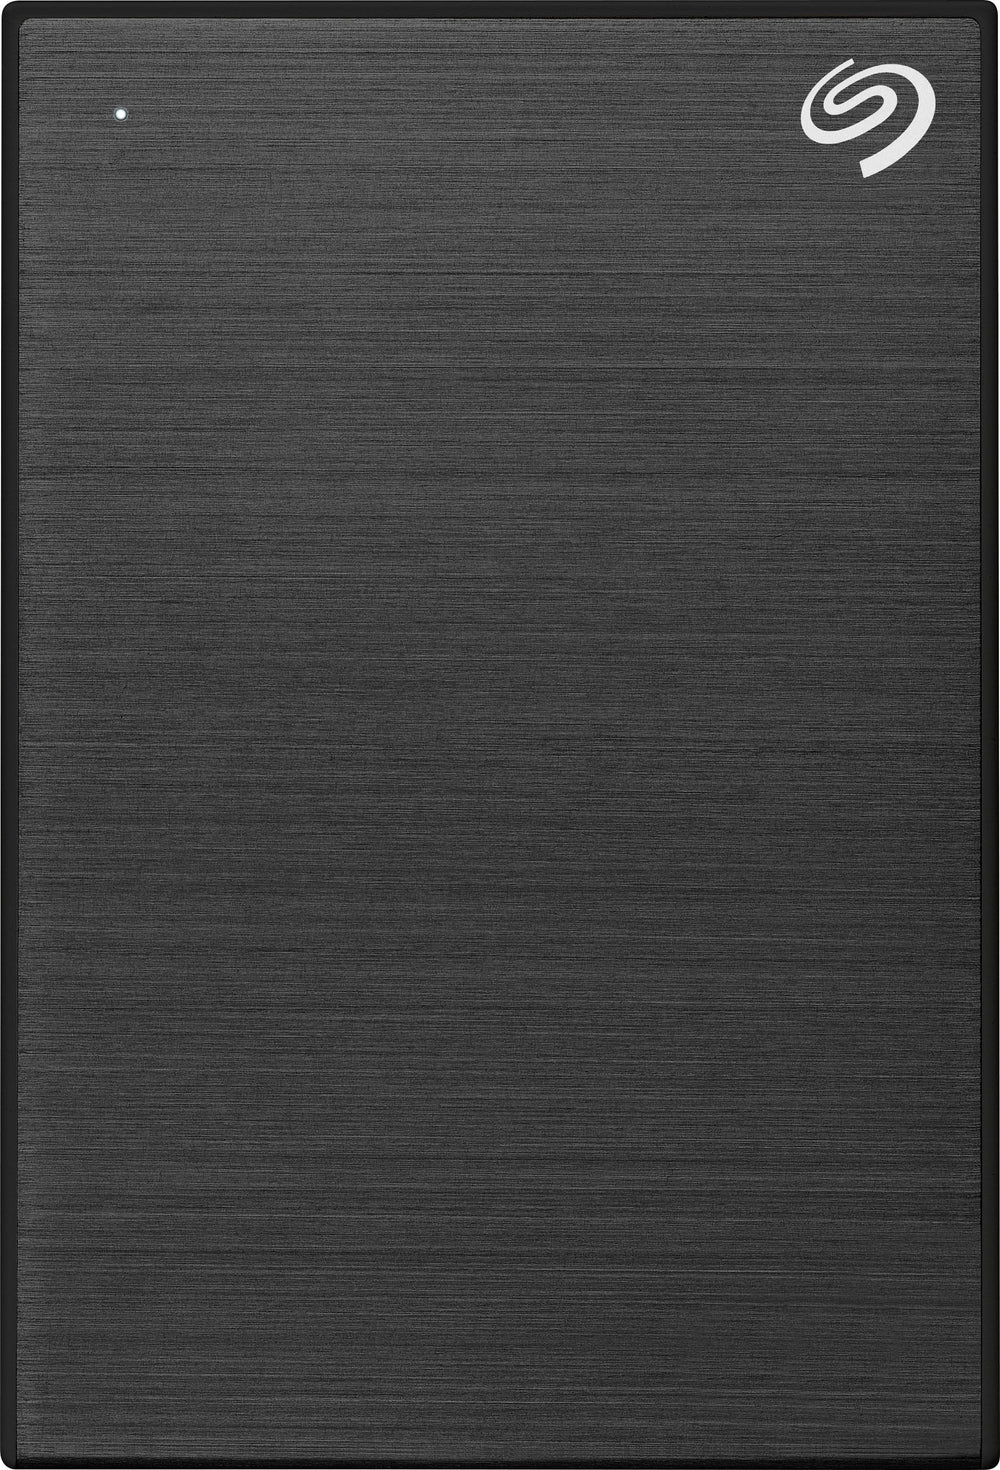 Seagate - One Touch with Password 4TB External USB 3.0 Portable Hard Drive with Rescue Data Recovery Services - Black_1